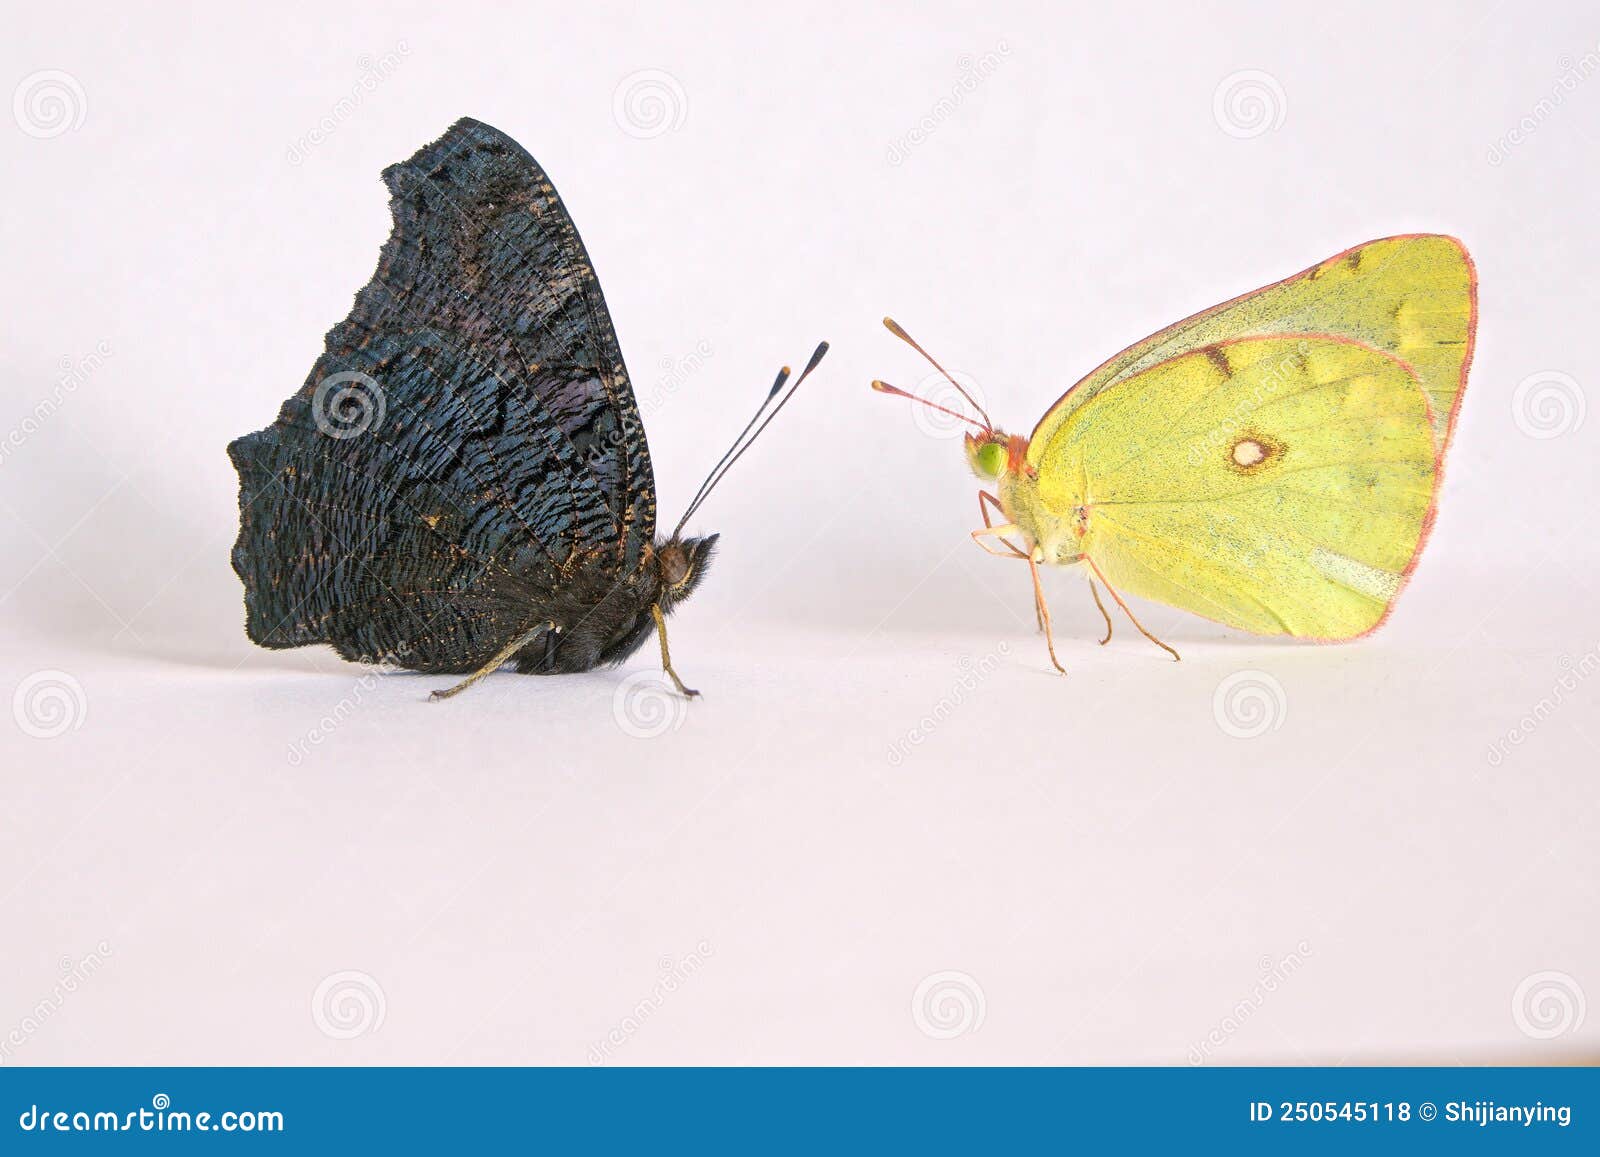 peacock butterfly and pieridae butterfly